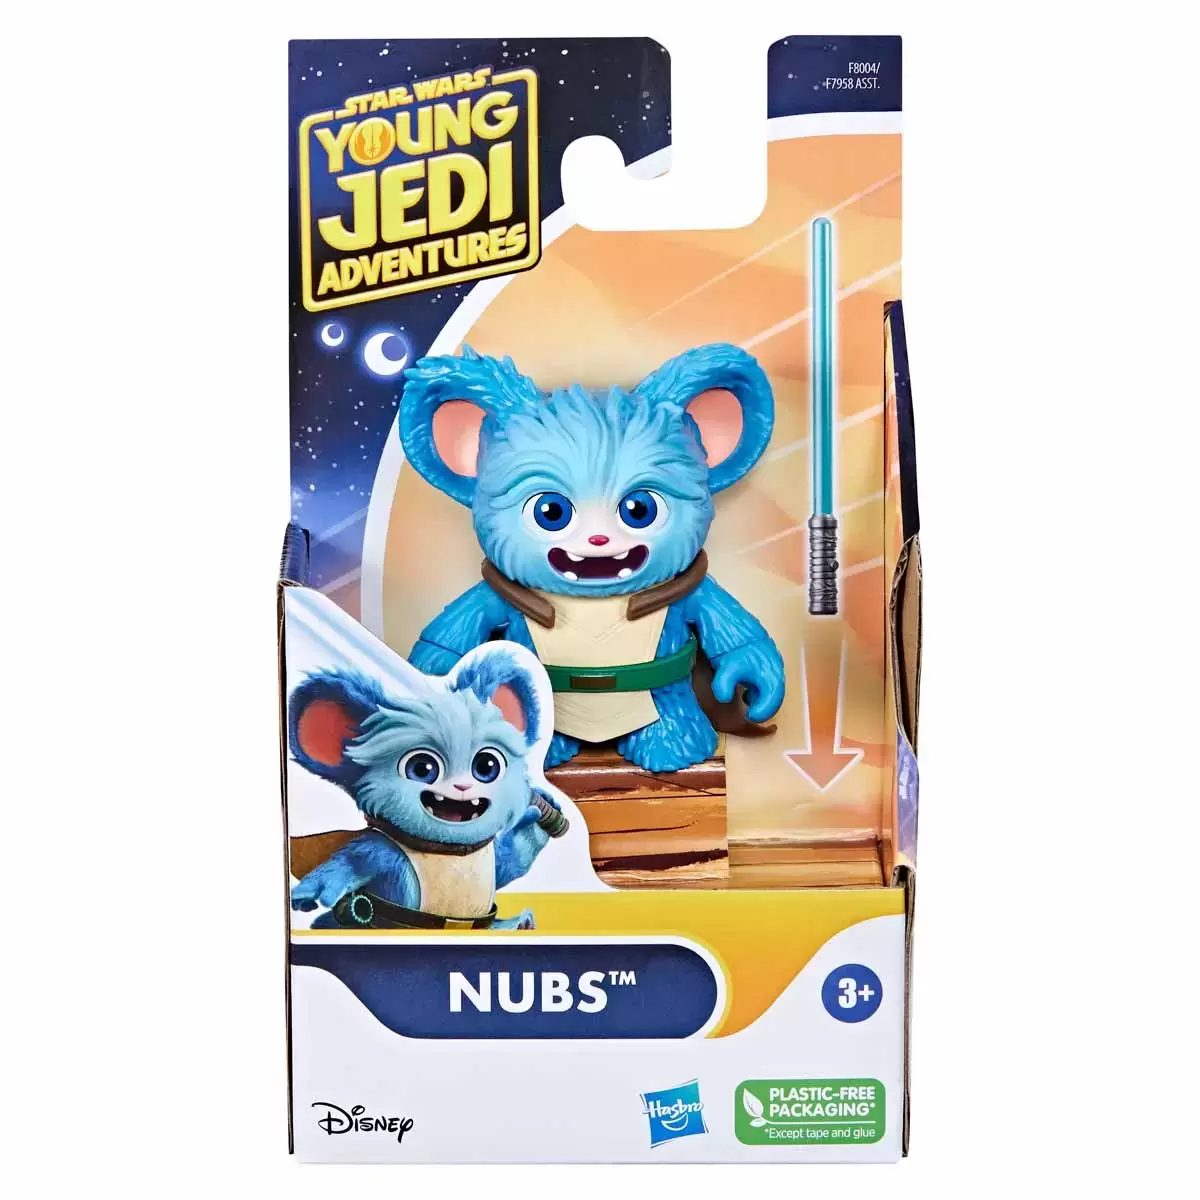 Young Jedi Adventures - Nubs